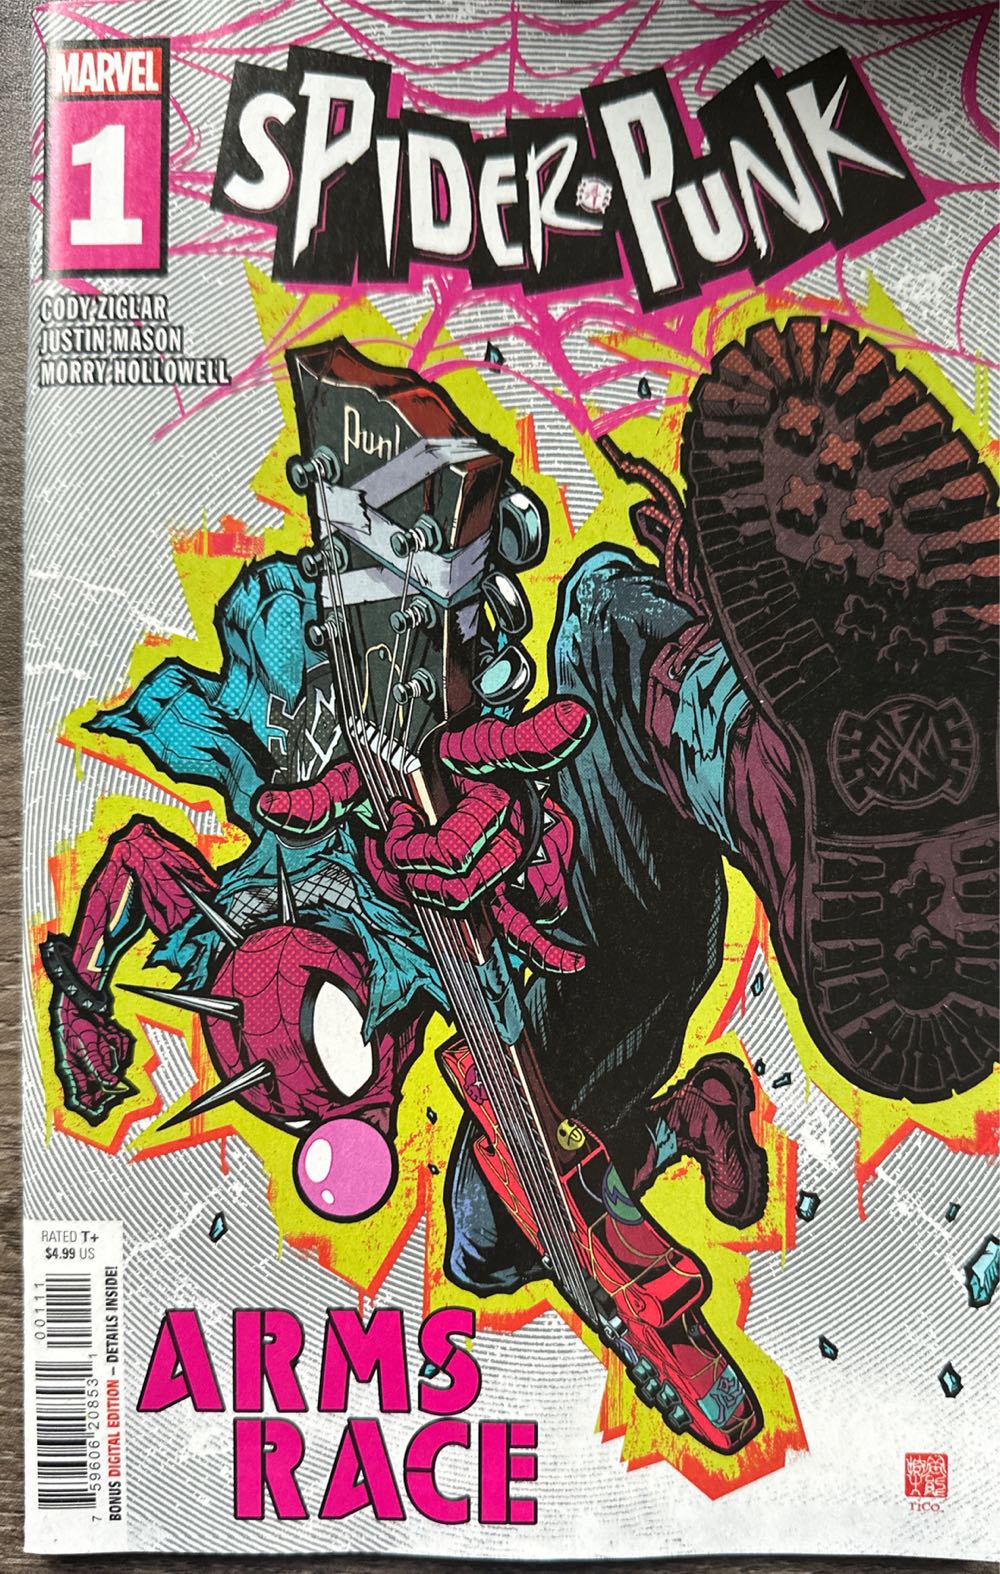 Spider Punk: Punk 1 Arms Race #1 Variant - Marvel Comics (1 - Feb 2024) comic book collectible [Barcode 75960620853100111] - Main Image 1